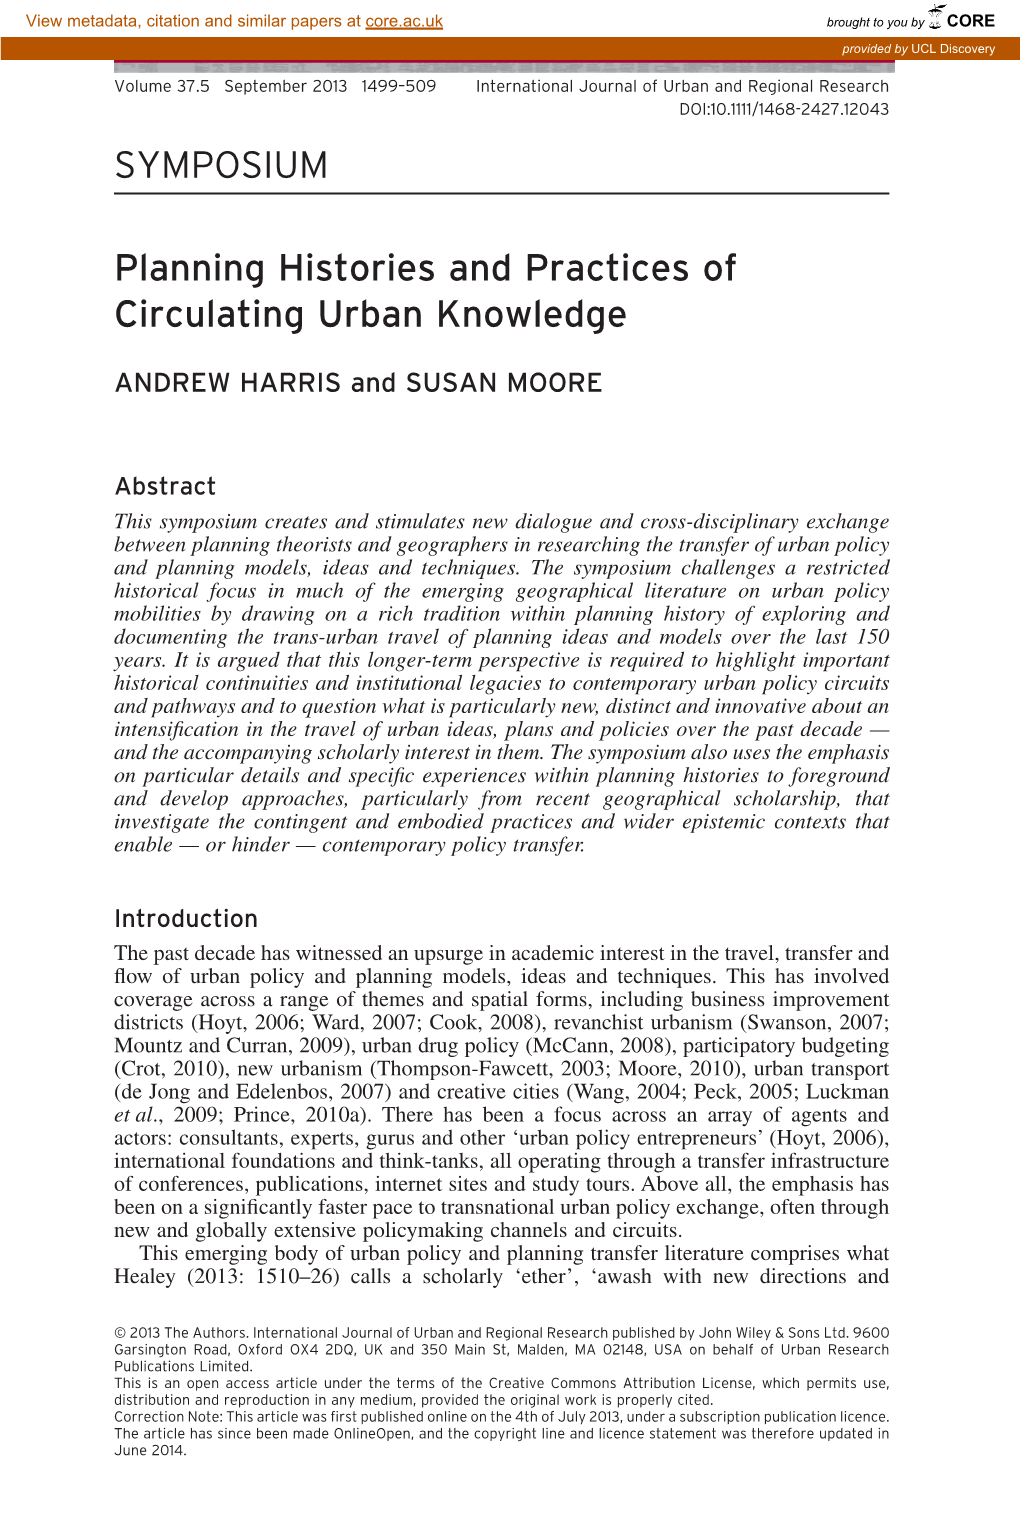 Planning Histories and Practices of Circulating Urban Knowledge